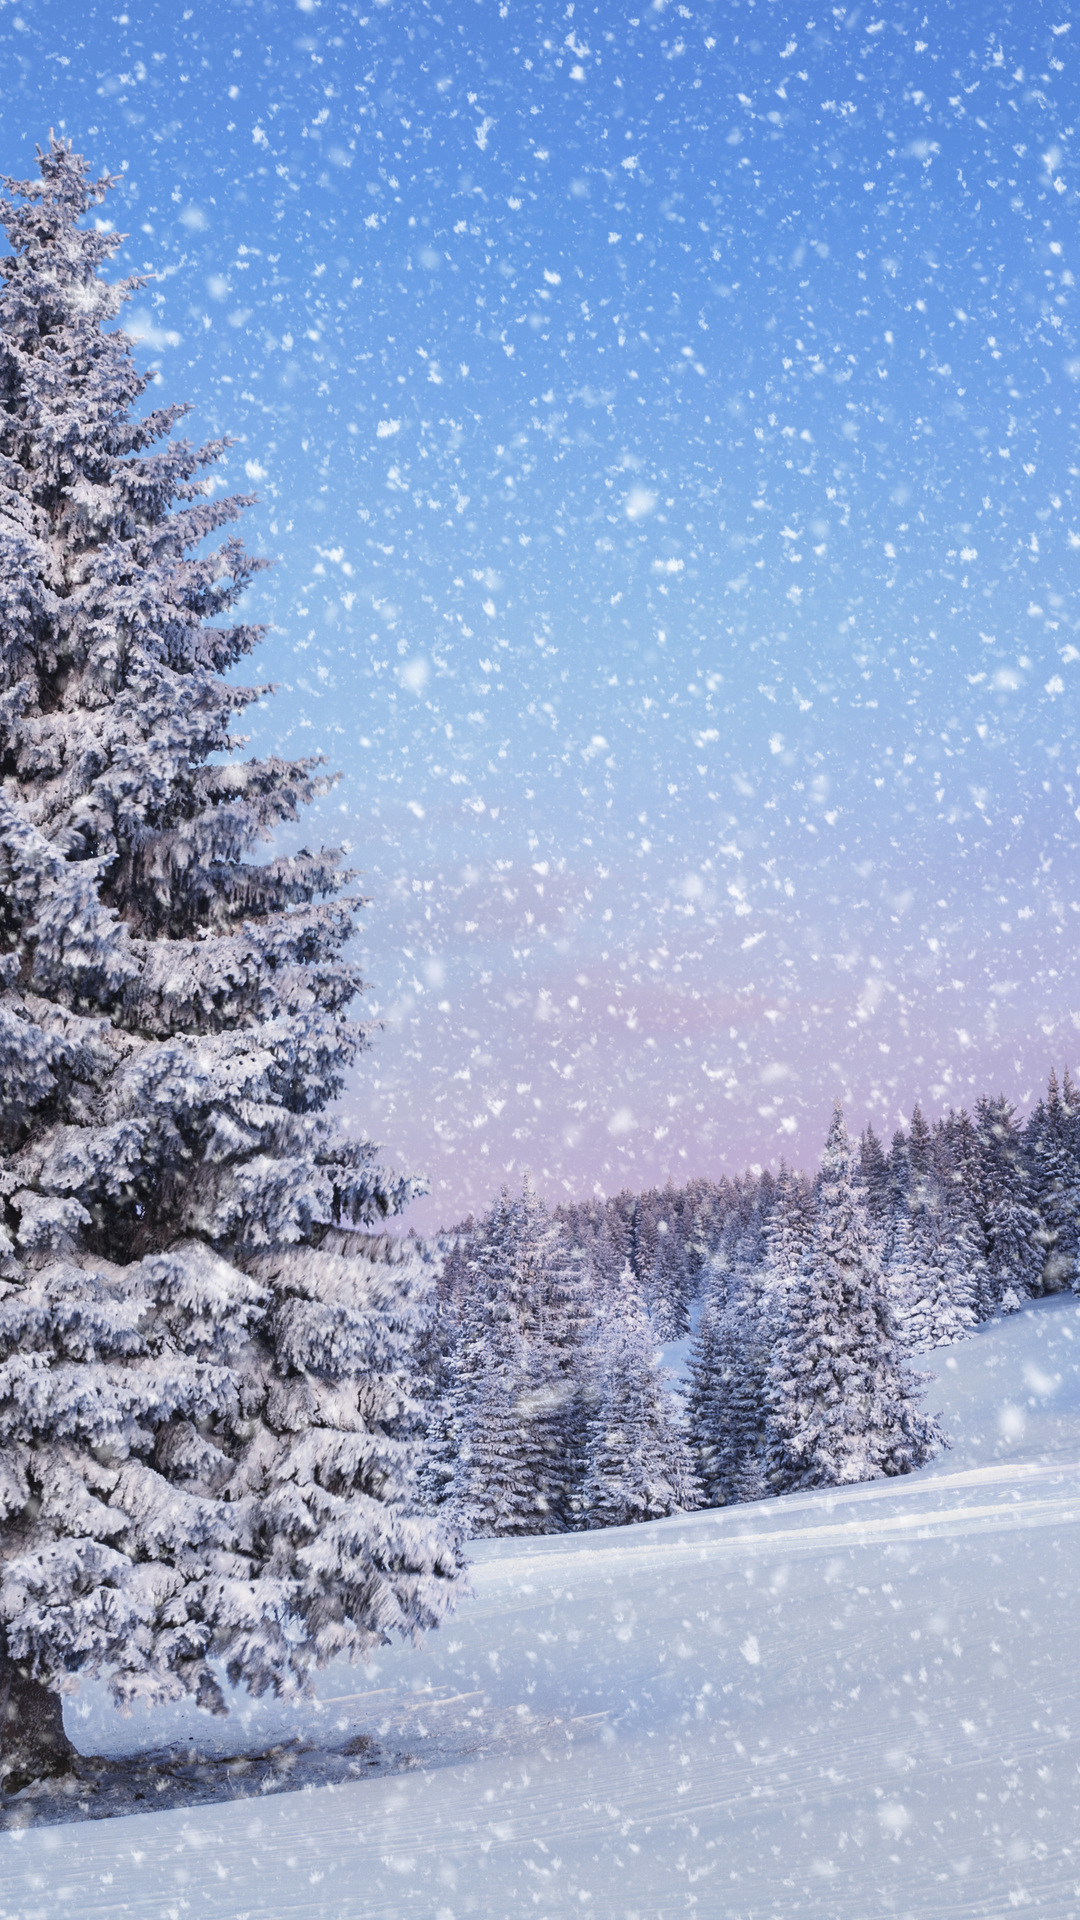 x1920 winter wallpaper Download Book Source for free download HD, 4K & high quality wallpaper